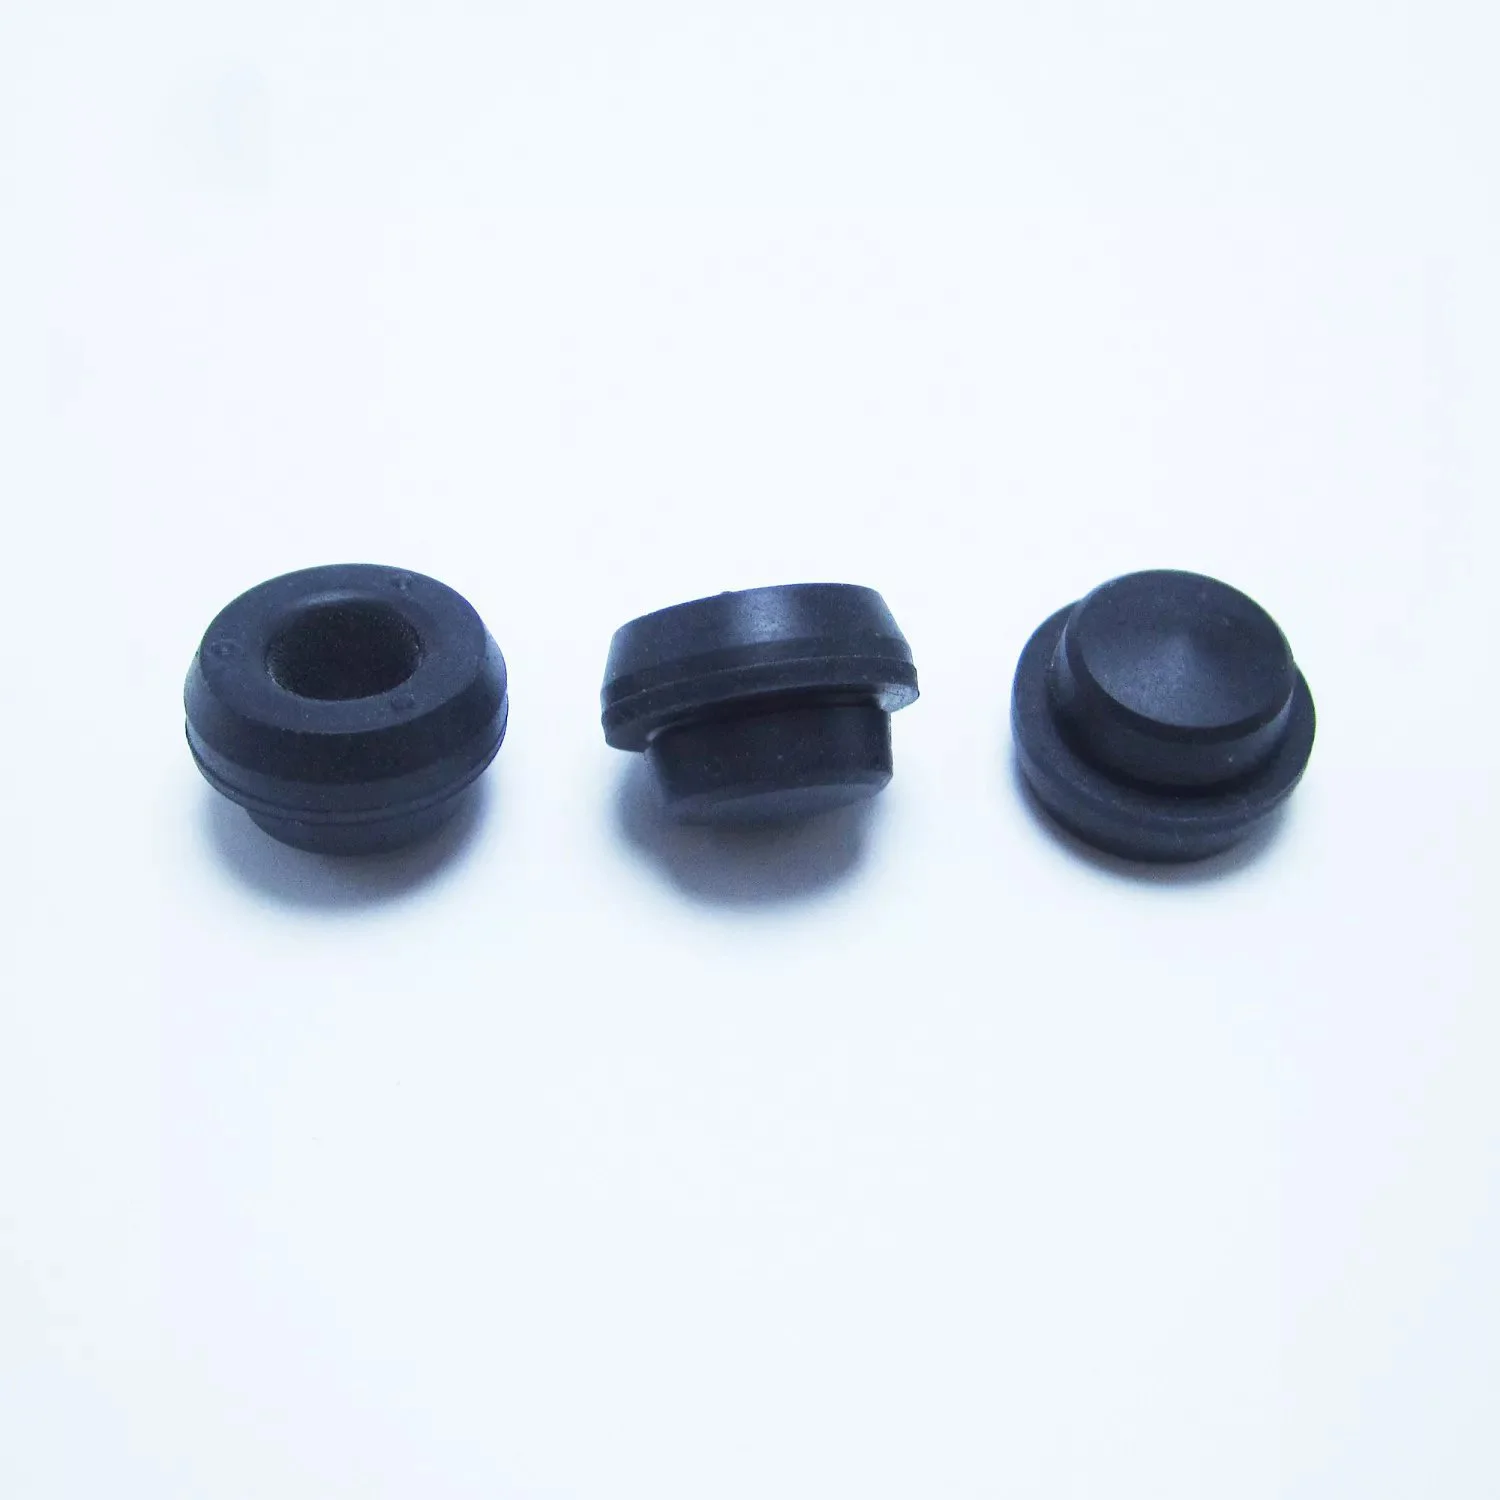 High quality butyl rubber stoppers for vacuum blood collection tube